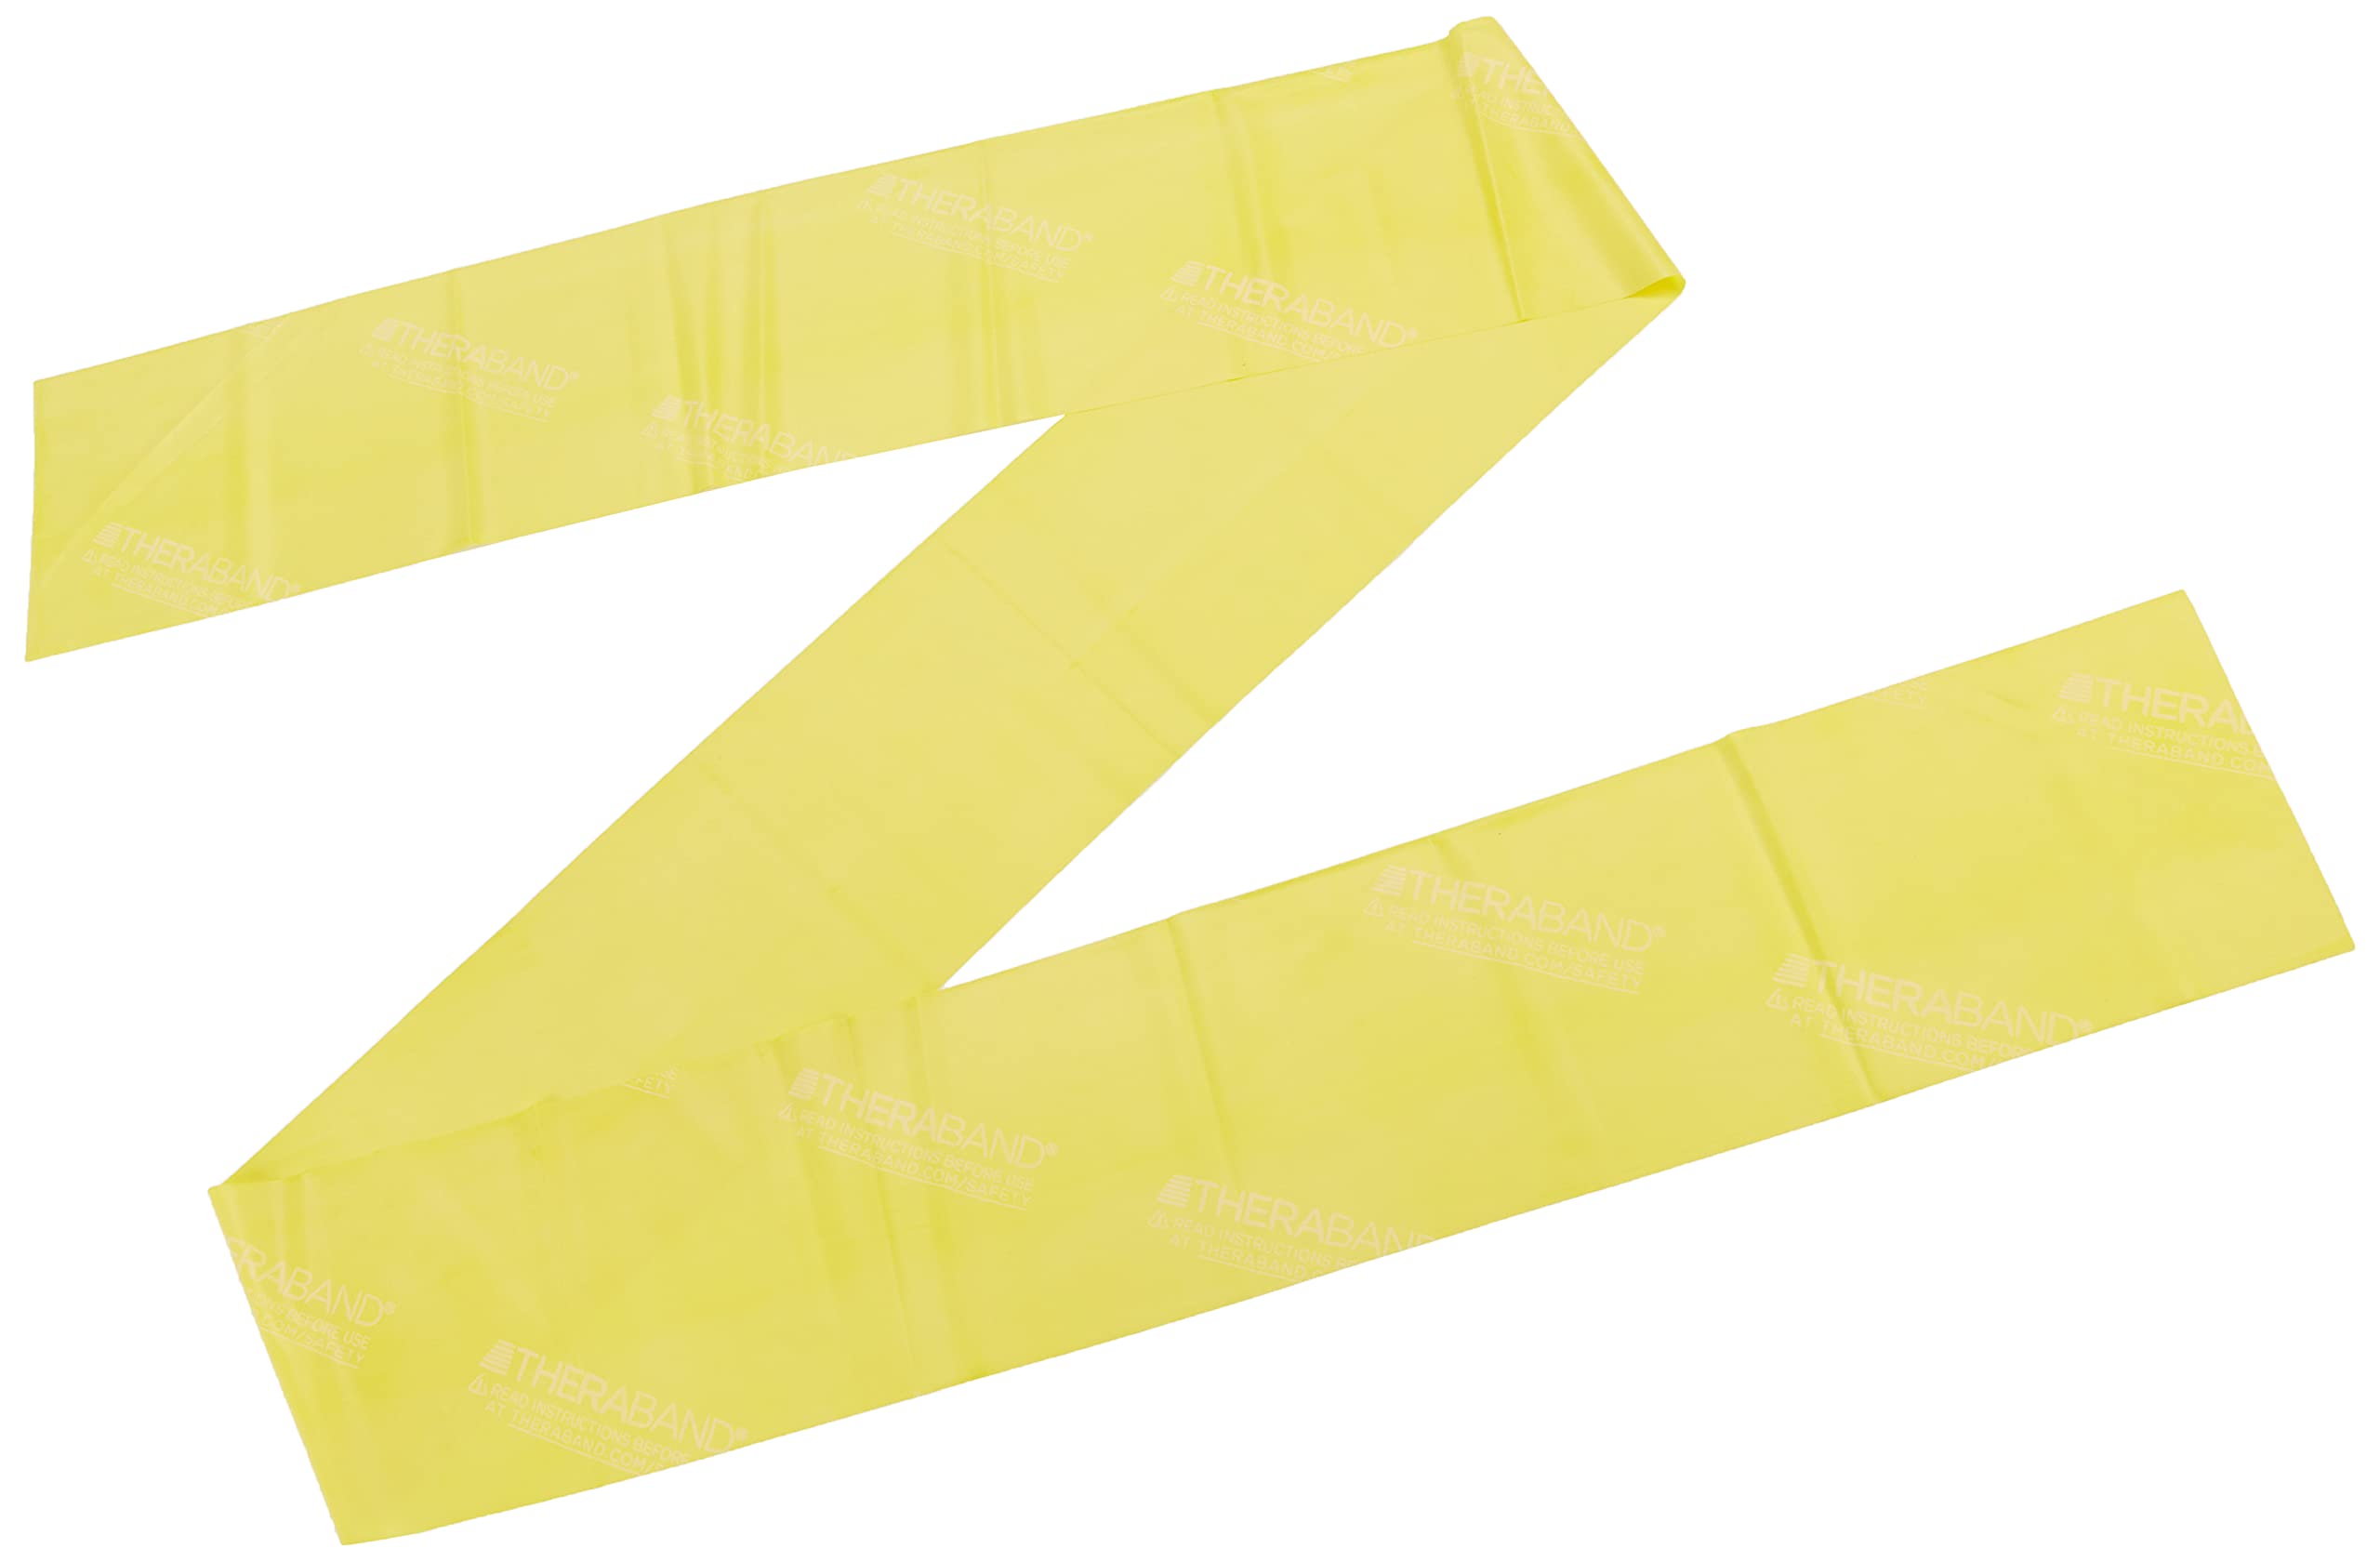 THERABAND Professional Latex Resistance Bands, Individual 6 Ft Elastic Band for Upper & Lower Body Exercise, Physical Therapy, Pilates, At-Home Workouts, 6 Foot Band, Yellow, Thin, Beginner Level 2